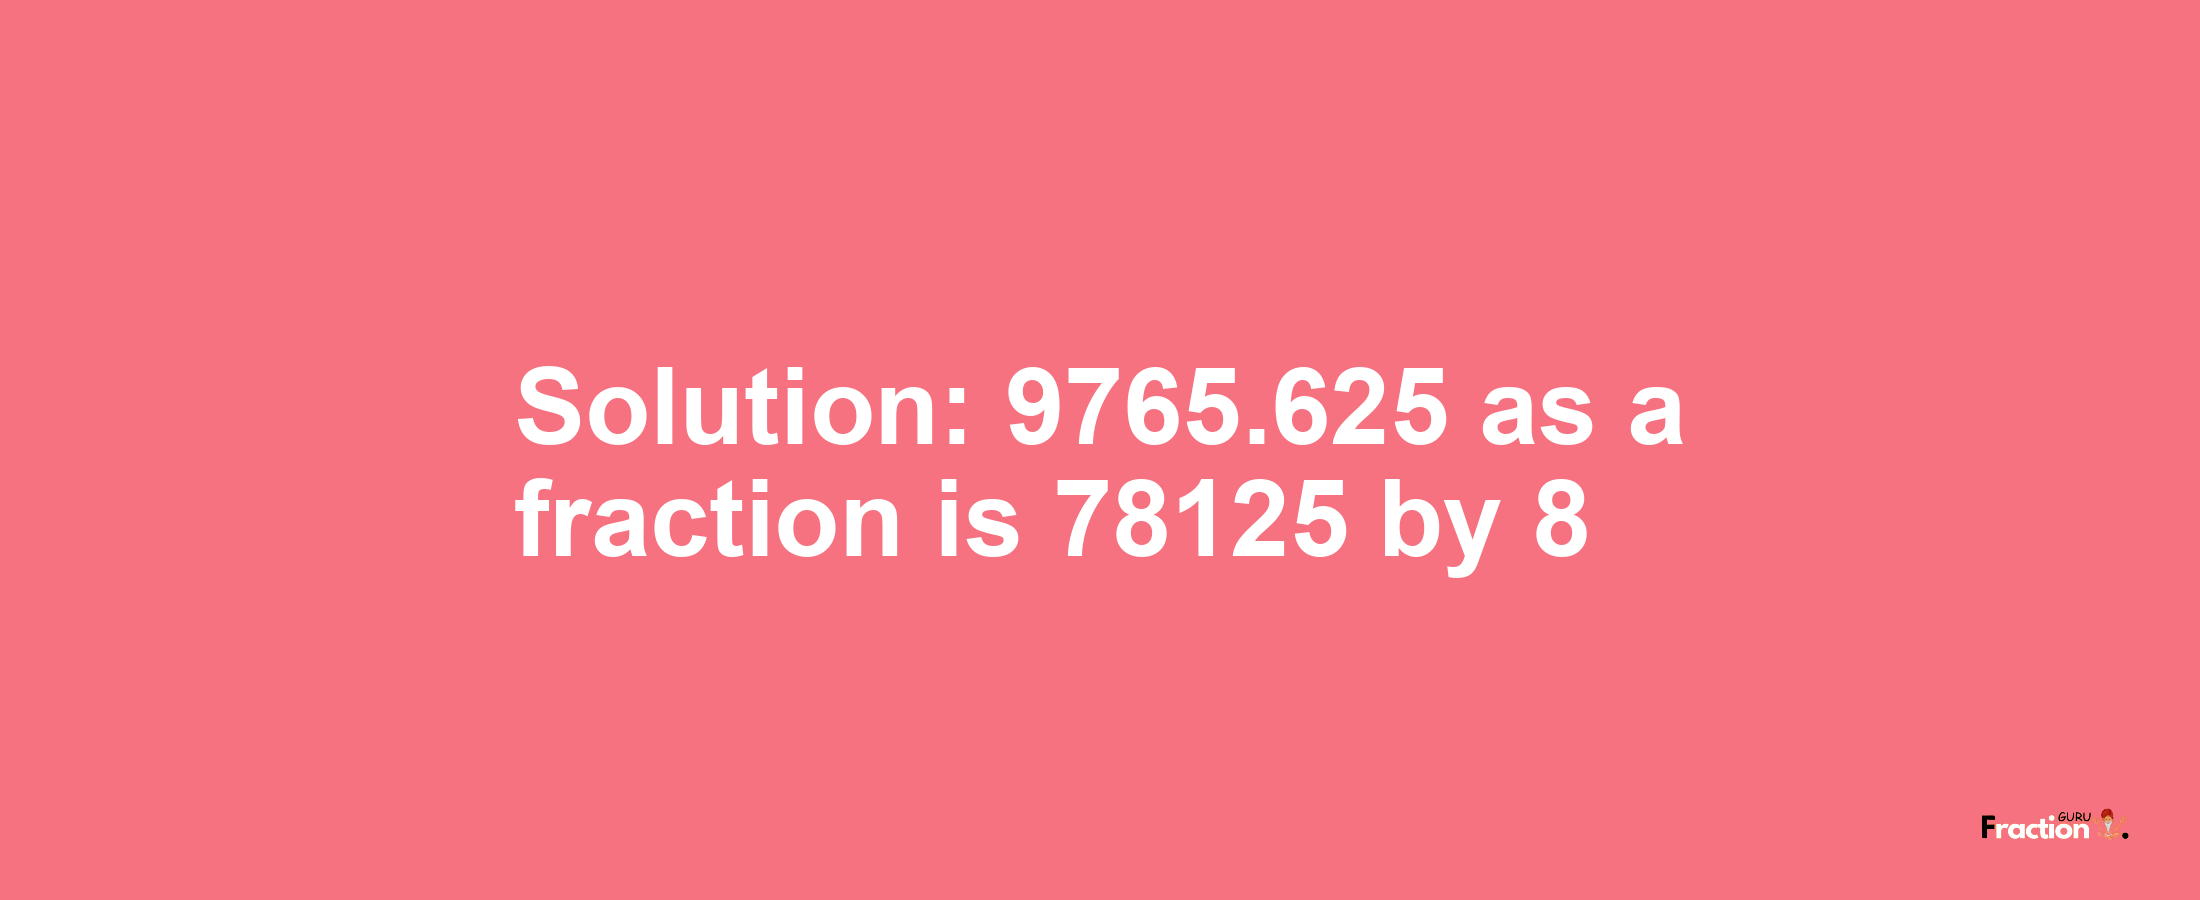 Solution:9765.625 as a fraction is 78125/8